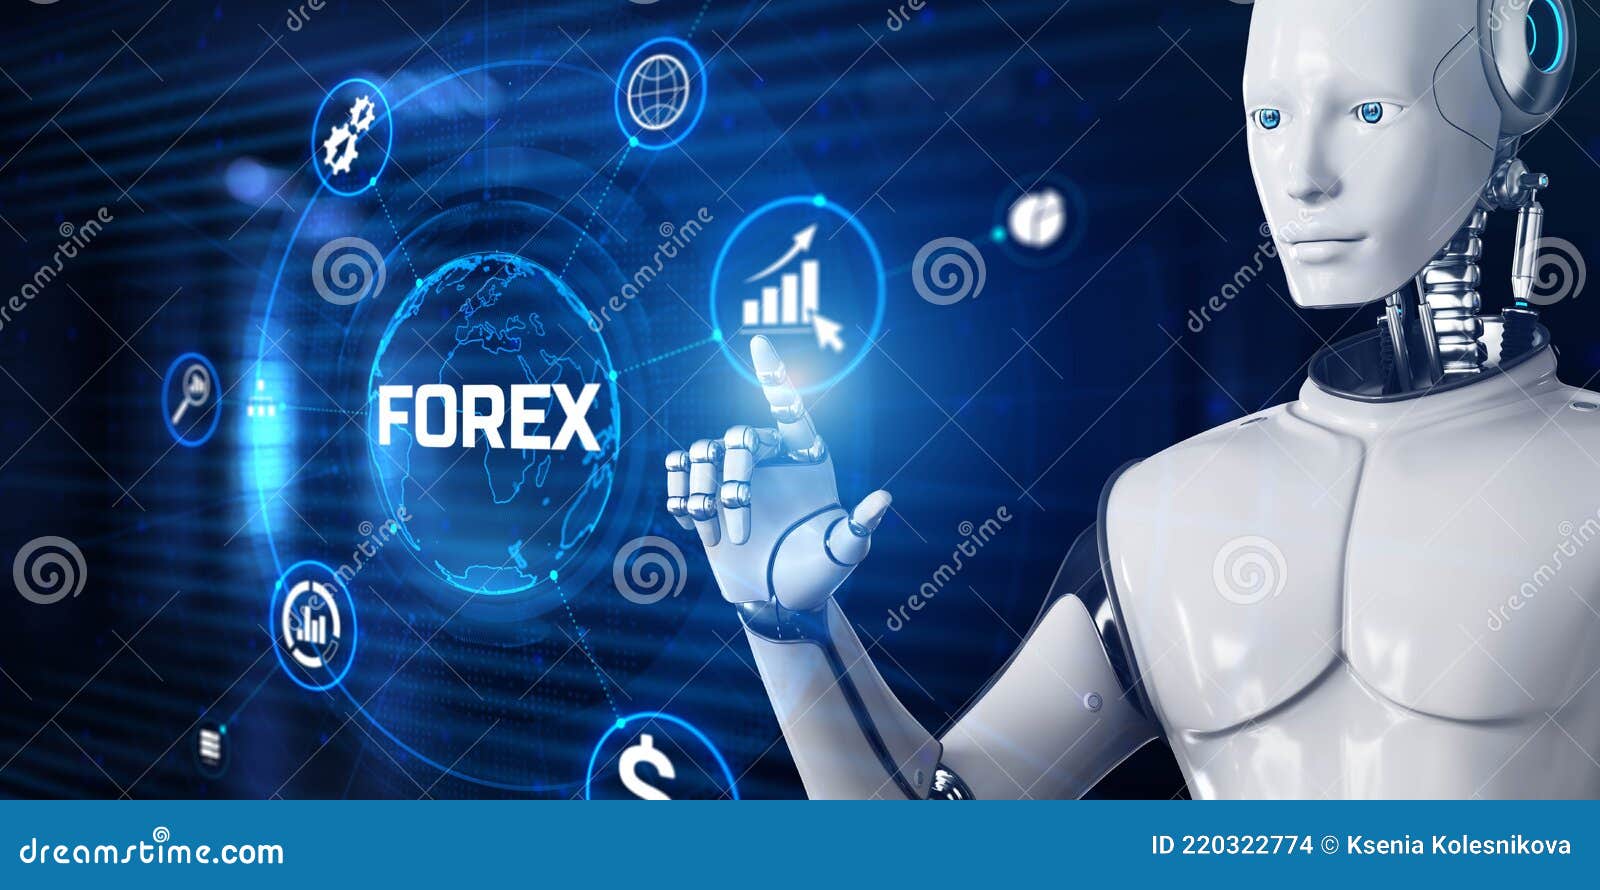 How to work with forex robot csg investment